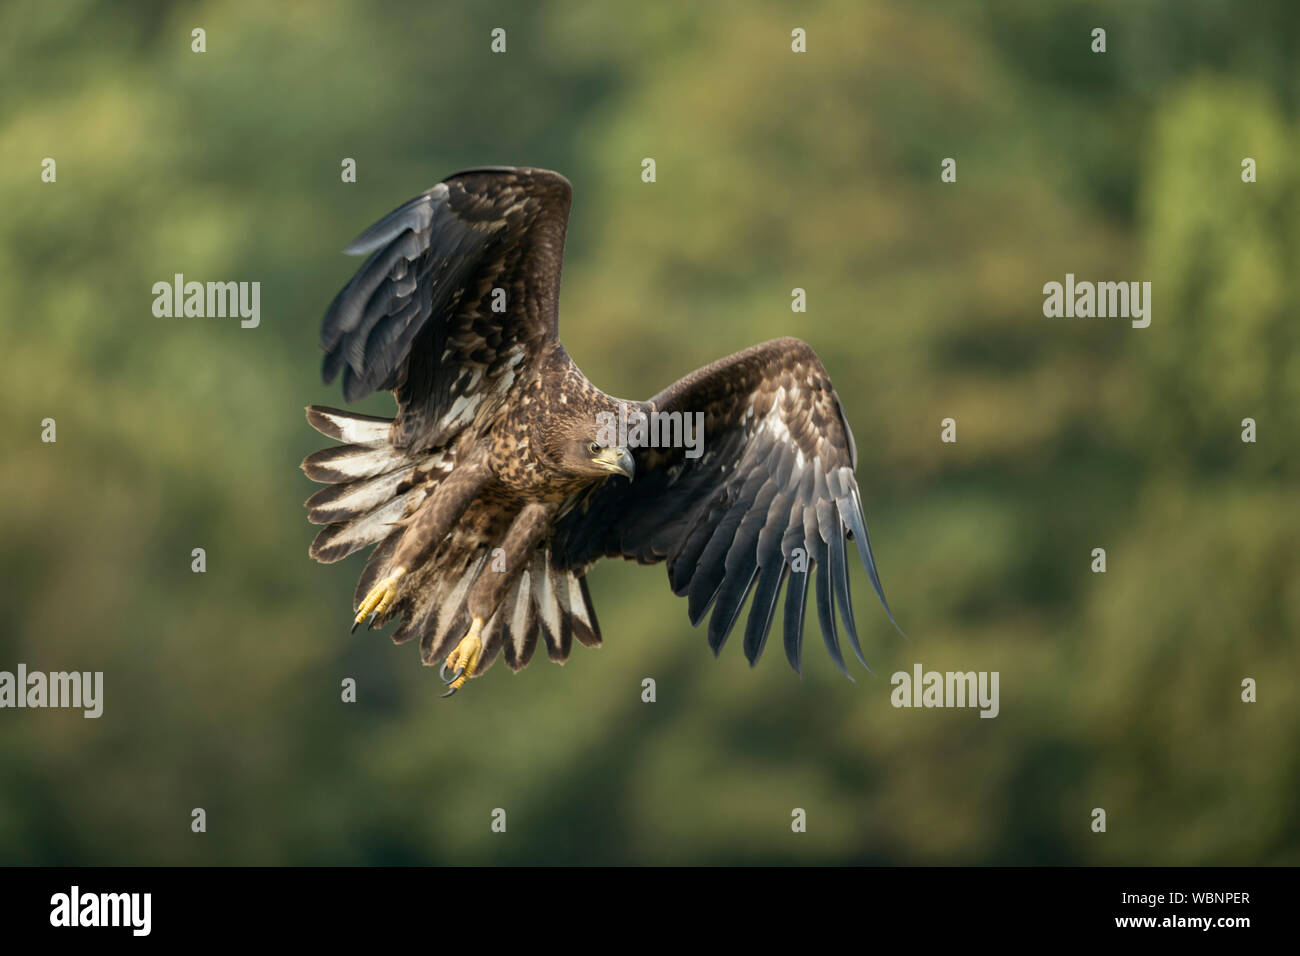 White-tailed Eagle / Sea Eagle ( Haliaeetus albicilla ) young adolescent in powerful flight, hunting along the edge of a forest, action, wildlife. Stock Photo